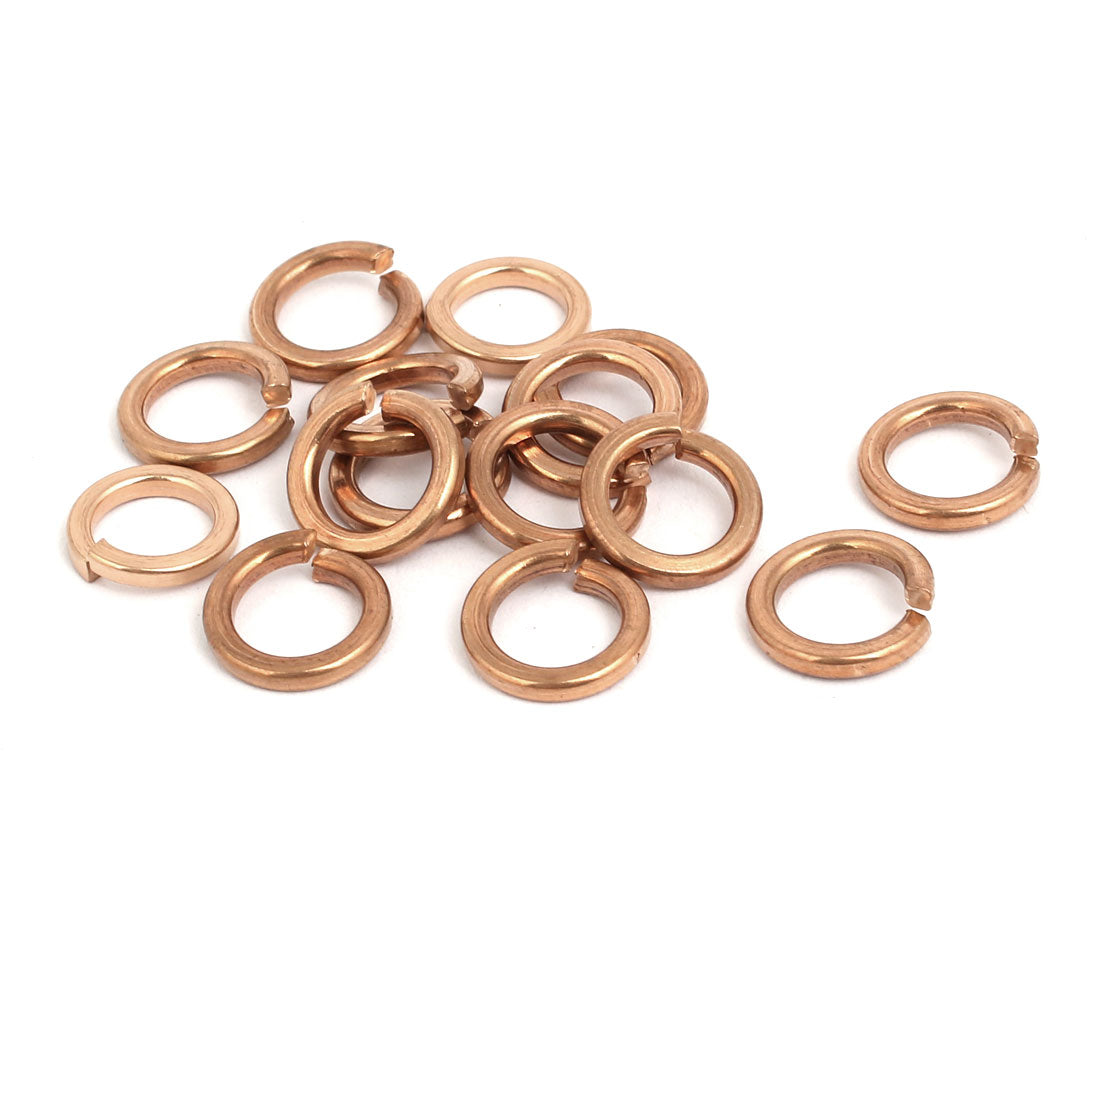 uxcell Uxcell 15pcs 8mm Inner Dia Brass Split Lock Spring Washer Gasket Gold Tone